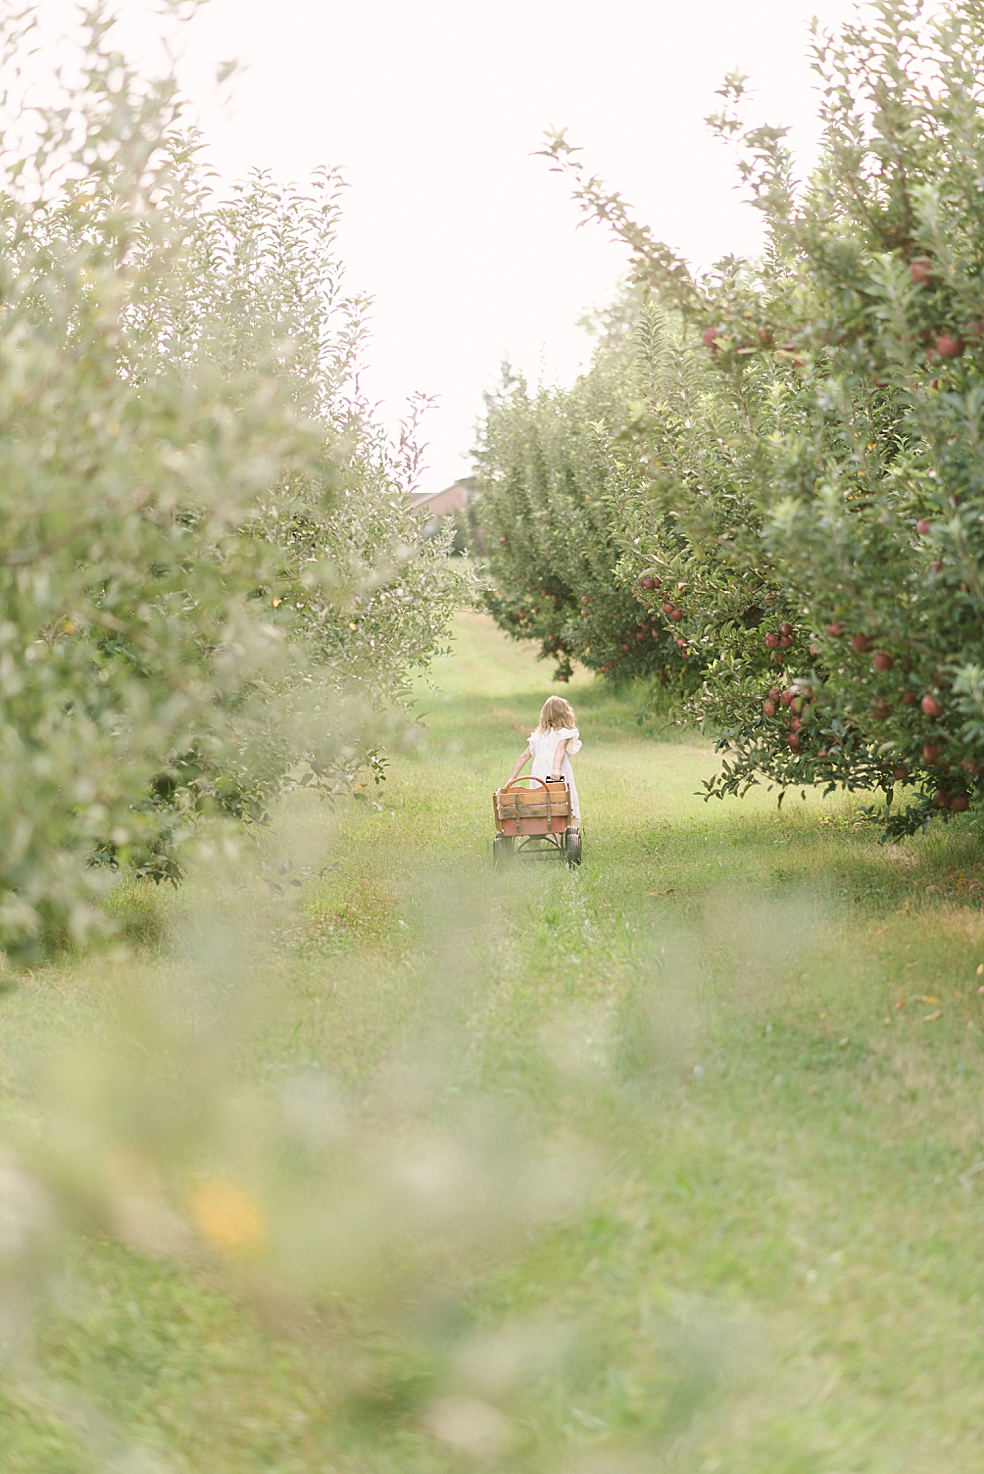 Little girl pulling a wagon through an apple orchard | Photo by Jessica Lee Photography